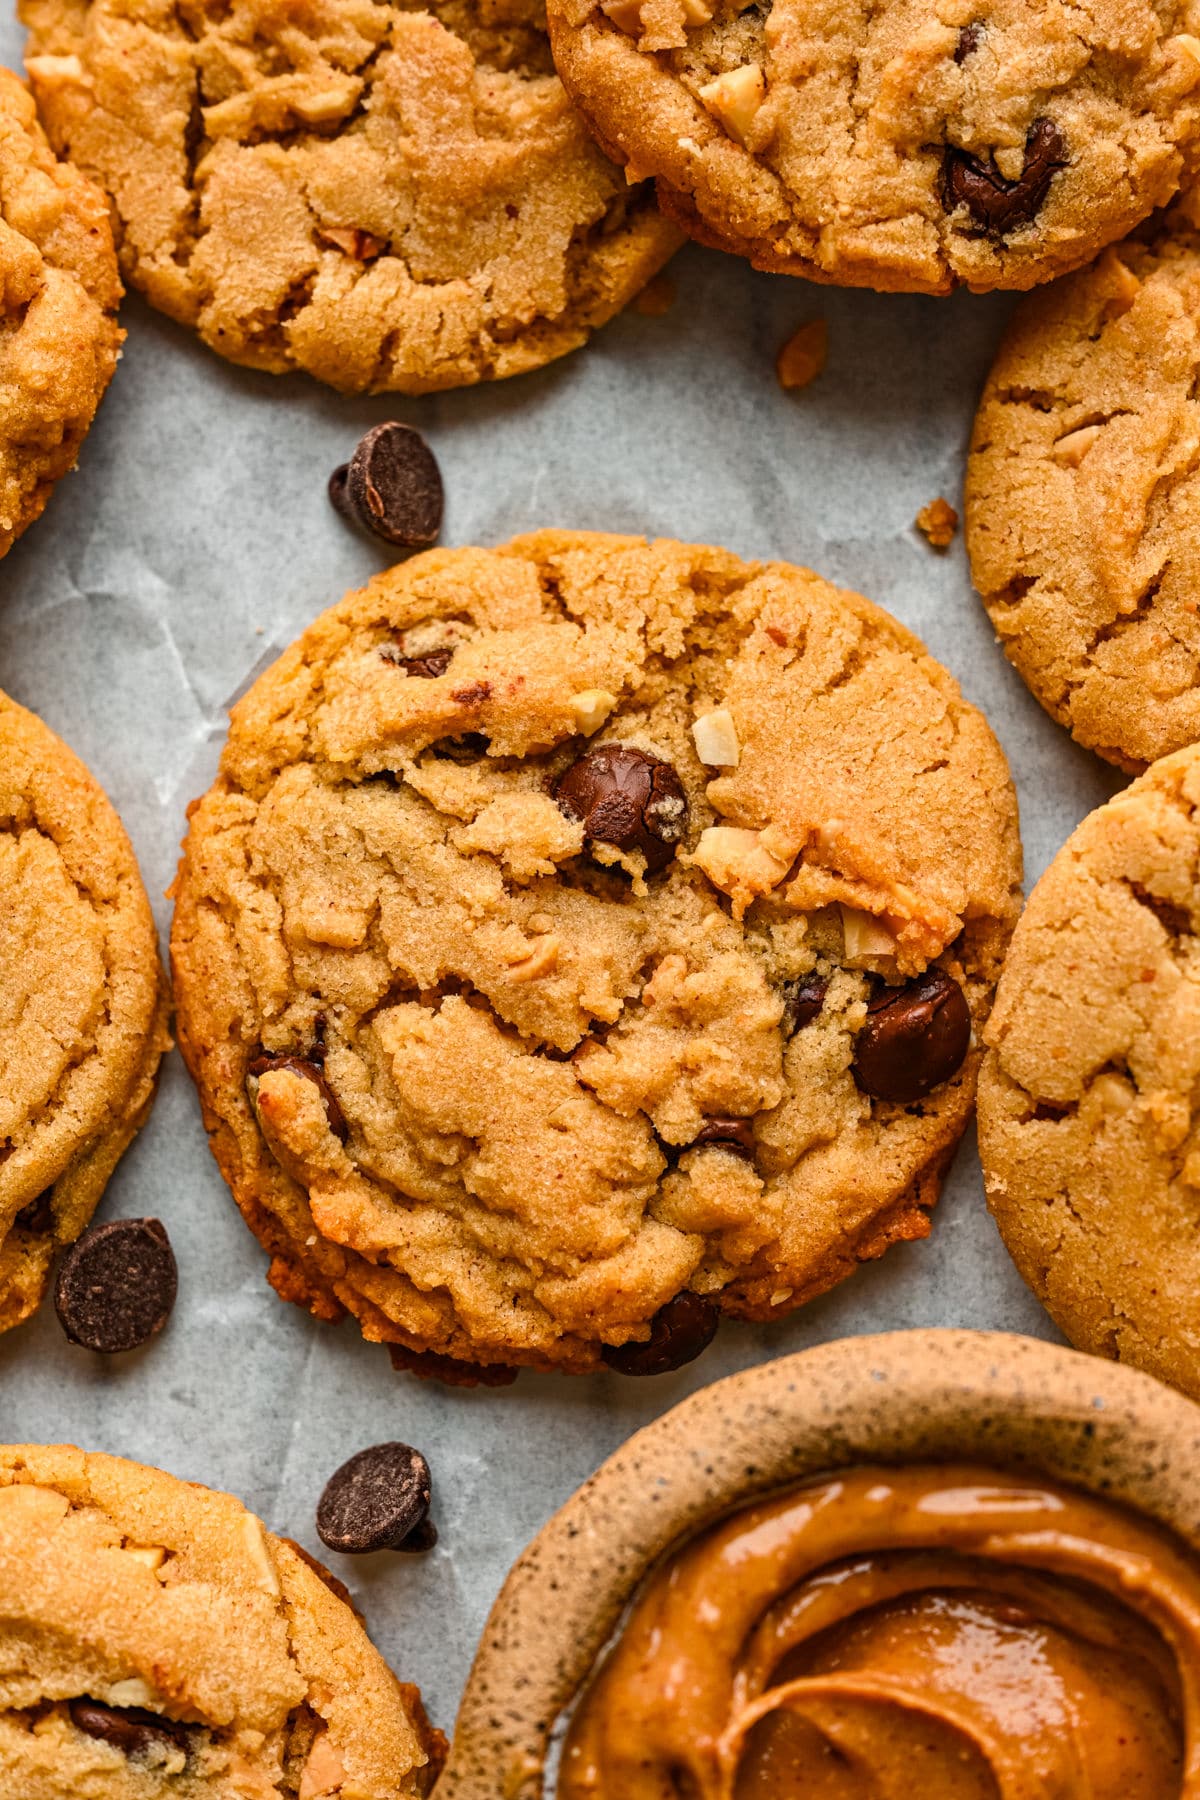 A peanut butter chocolate chip cookie surrounded by cookies.